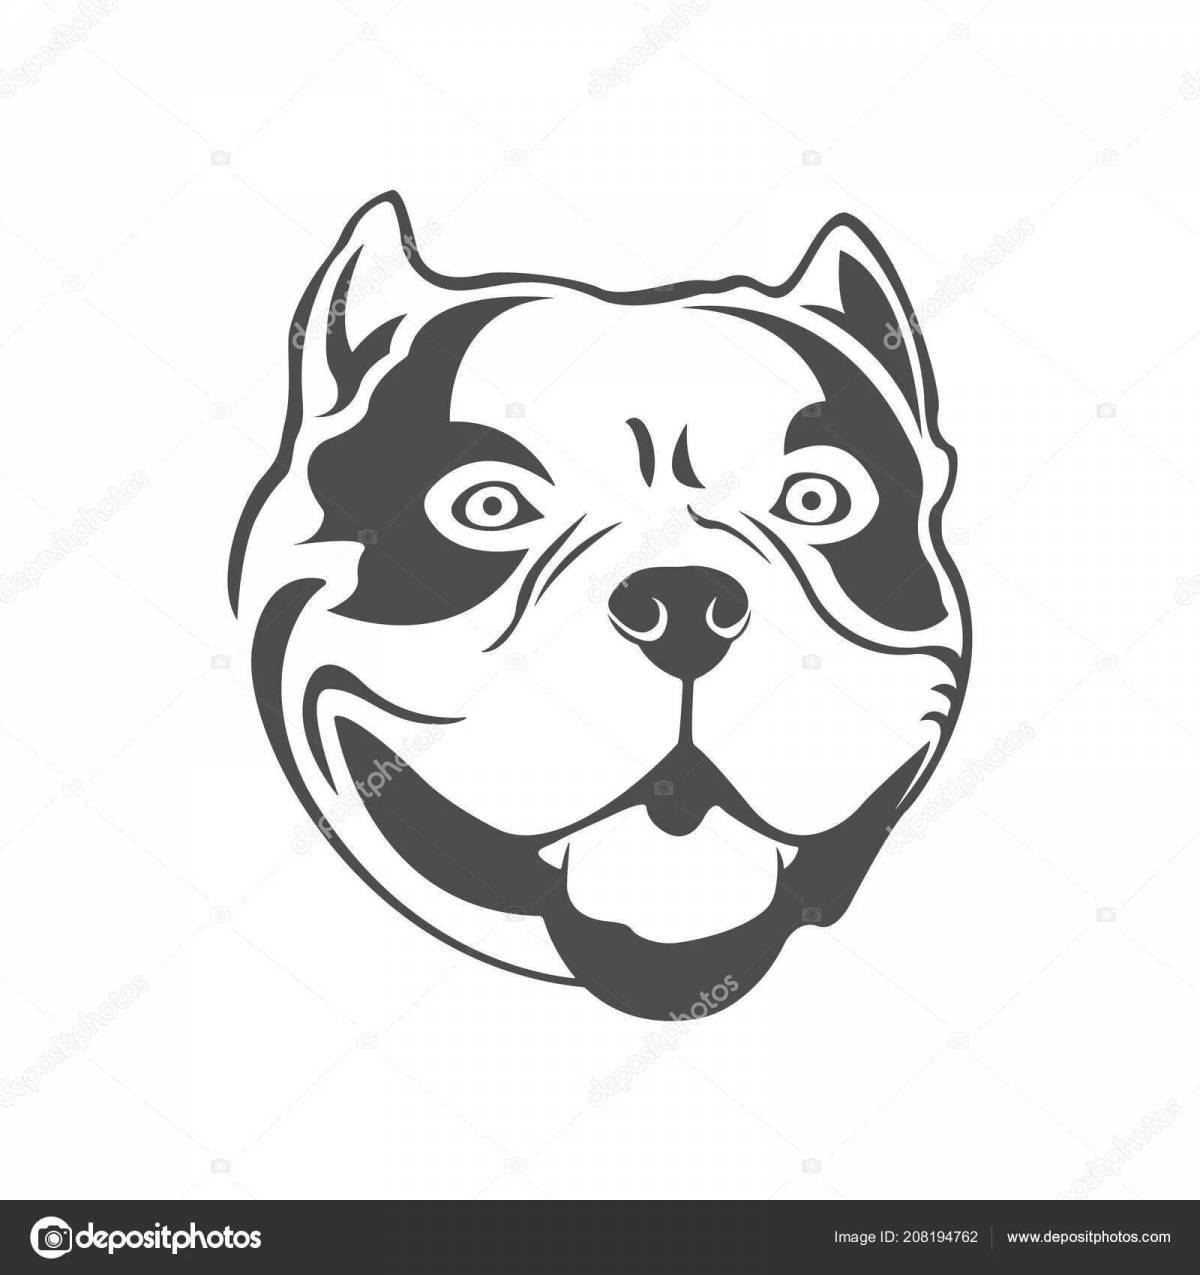 Coloring page of the luxurious american bully